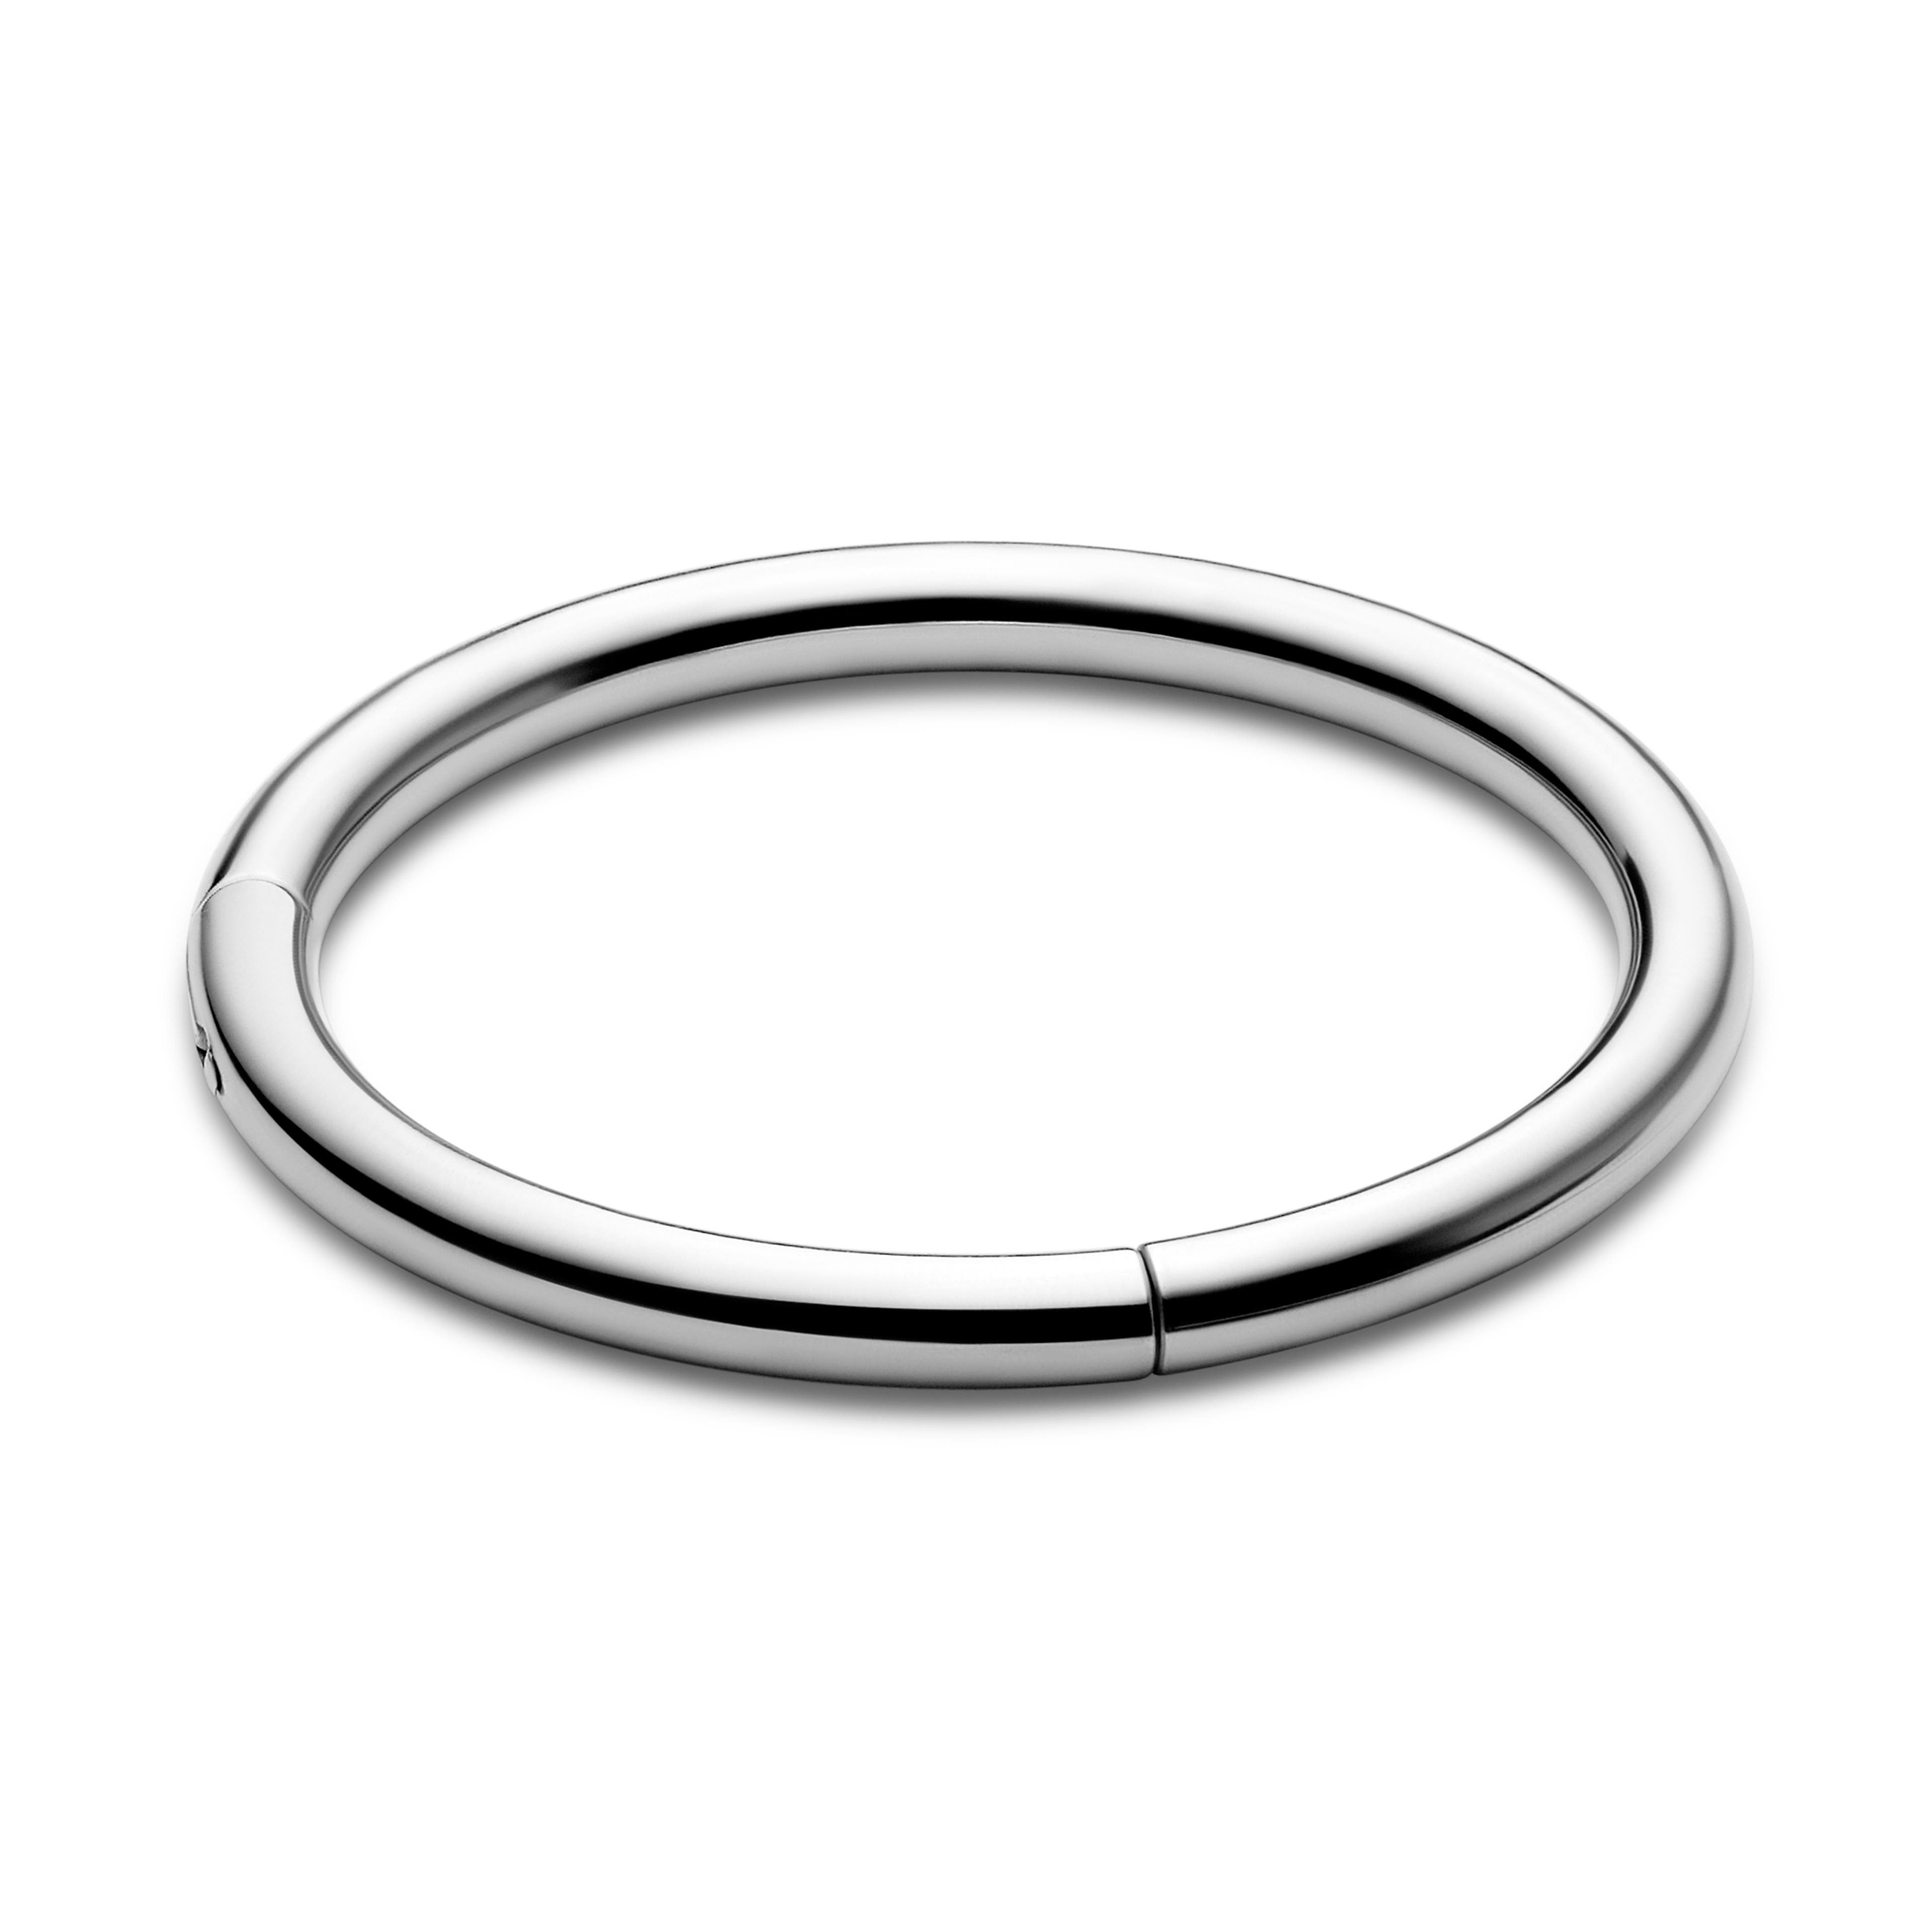 9 mm Silver-tone Surgical Steel Piercing Ring